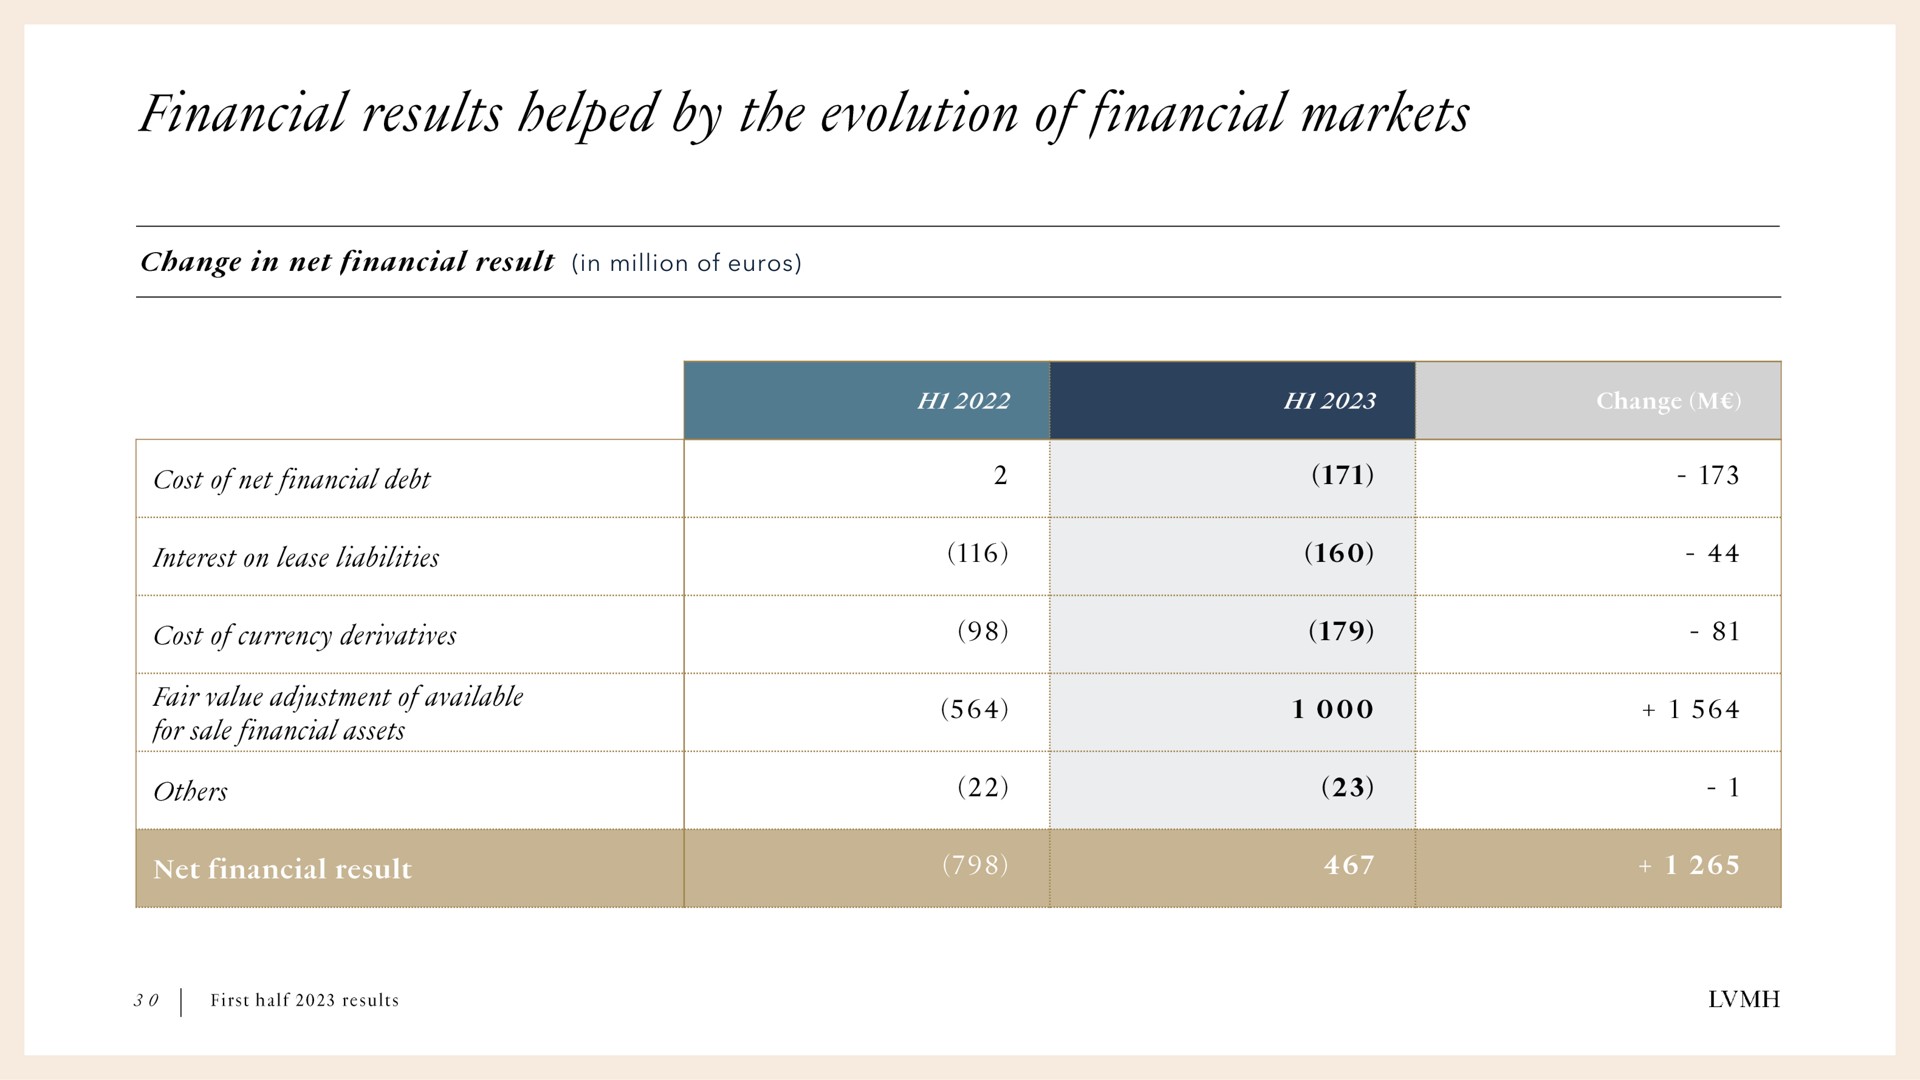 in million of financial results helped by the evolution financial markets | LVMH